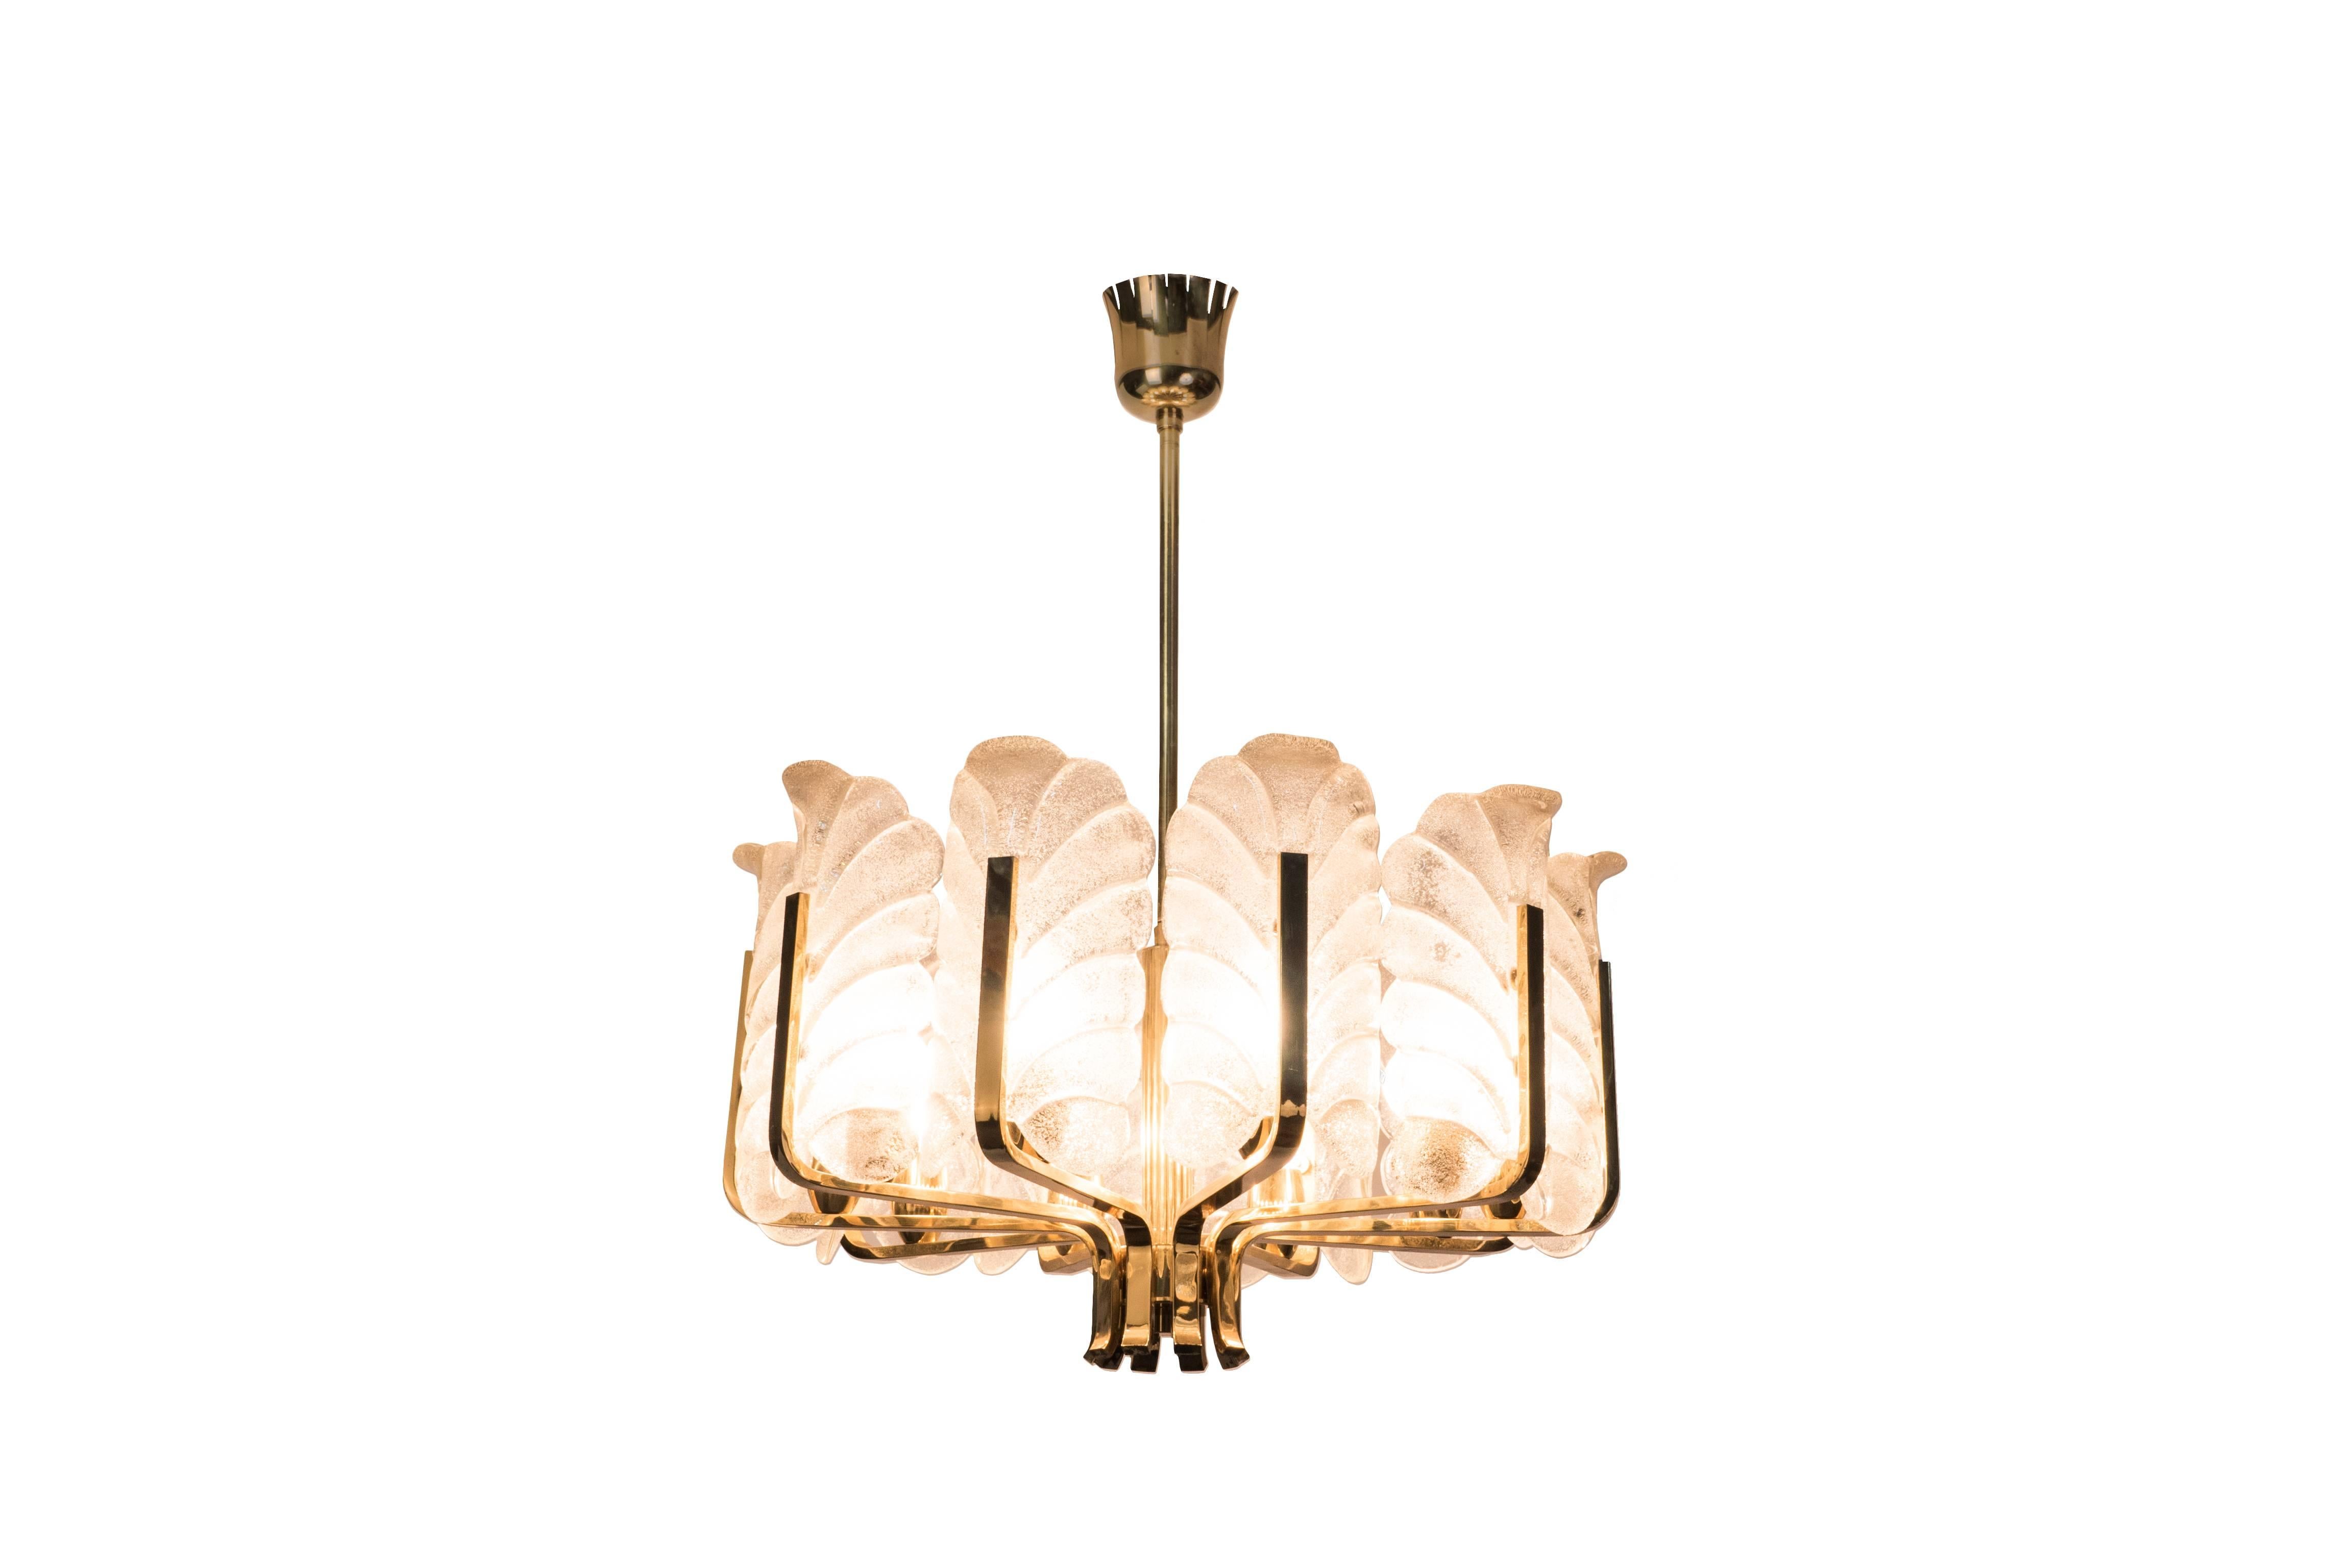 This exquisite Mid-Century Modernist chandelier was designed by Carl Fagerlund and it features a ten-arms frame in brass with iridescent glass stylized leafs by Orrefors.

Made in Sweden, circa 1940

Measures: 21 1/2